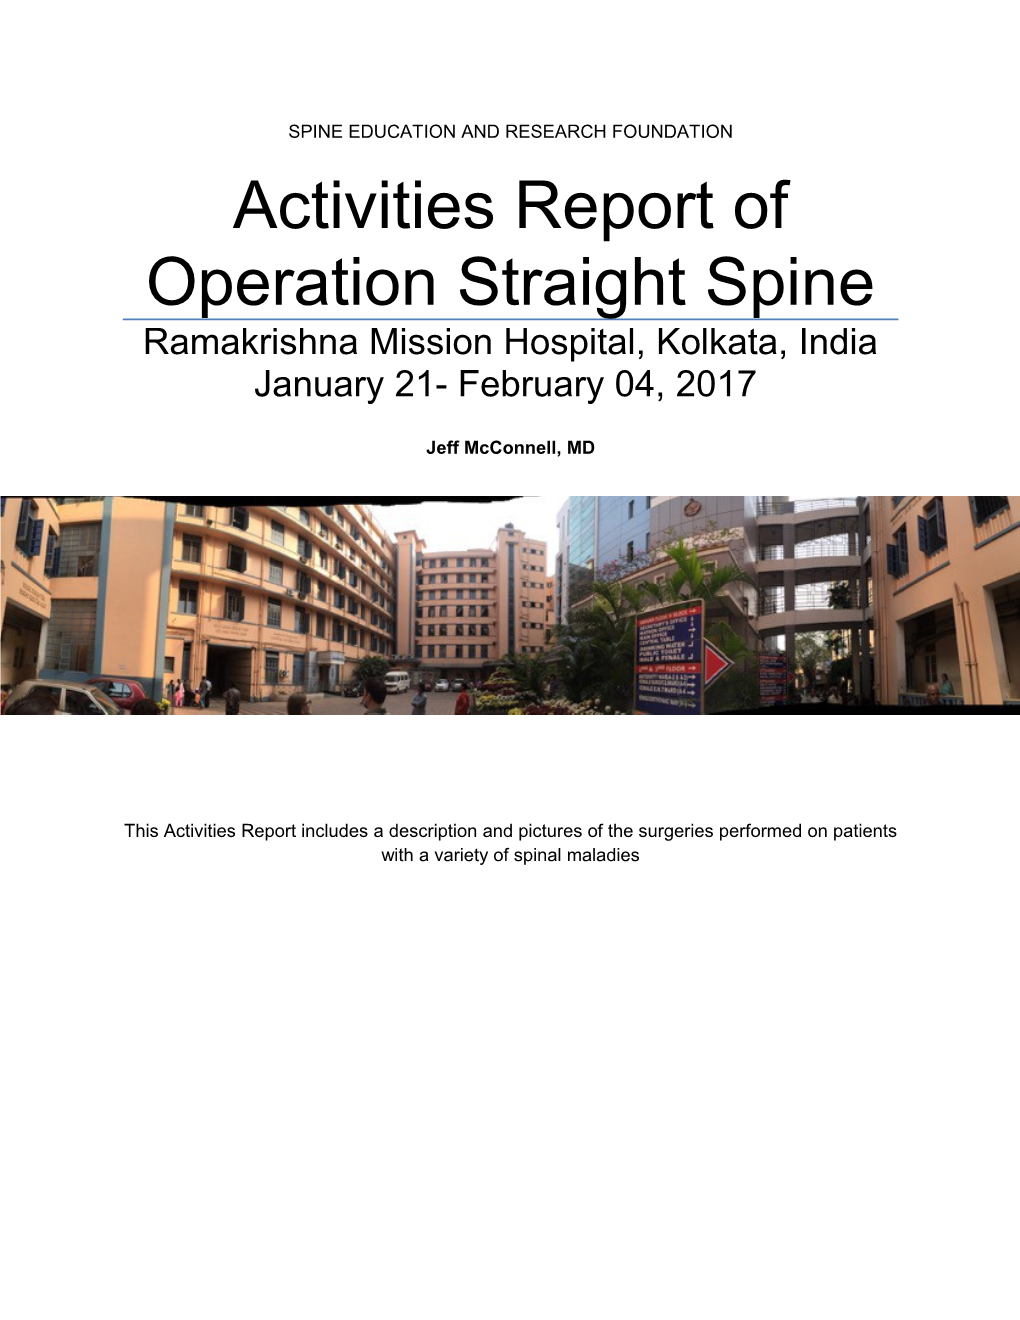 Activities Report of Operation Straight Spine